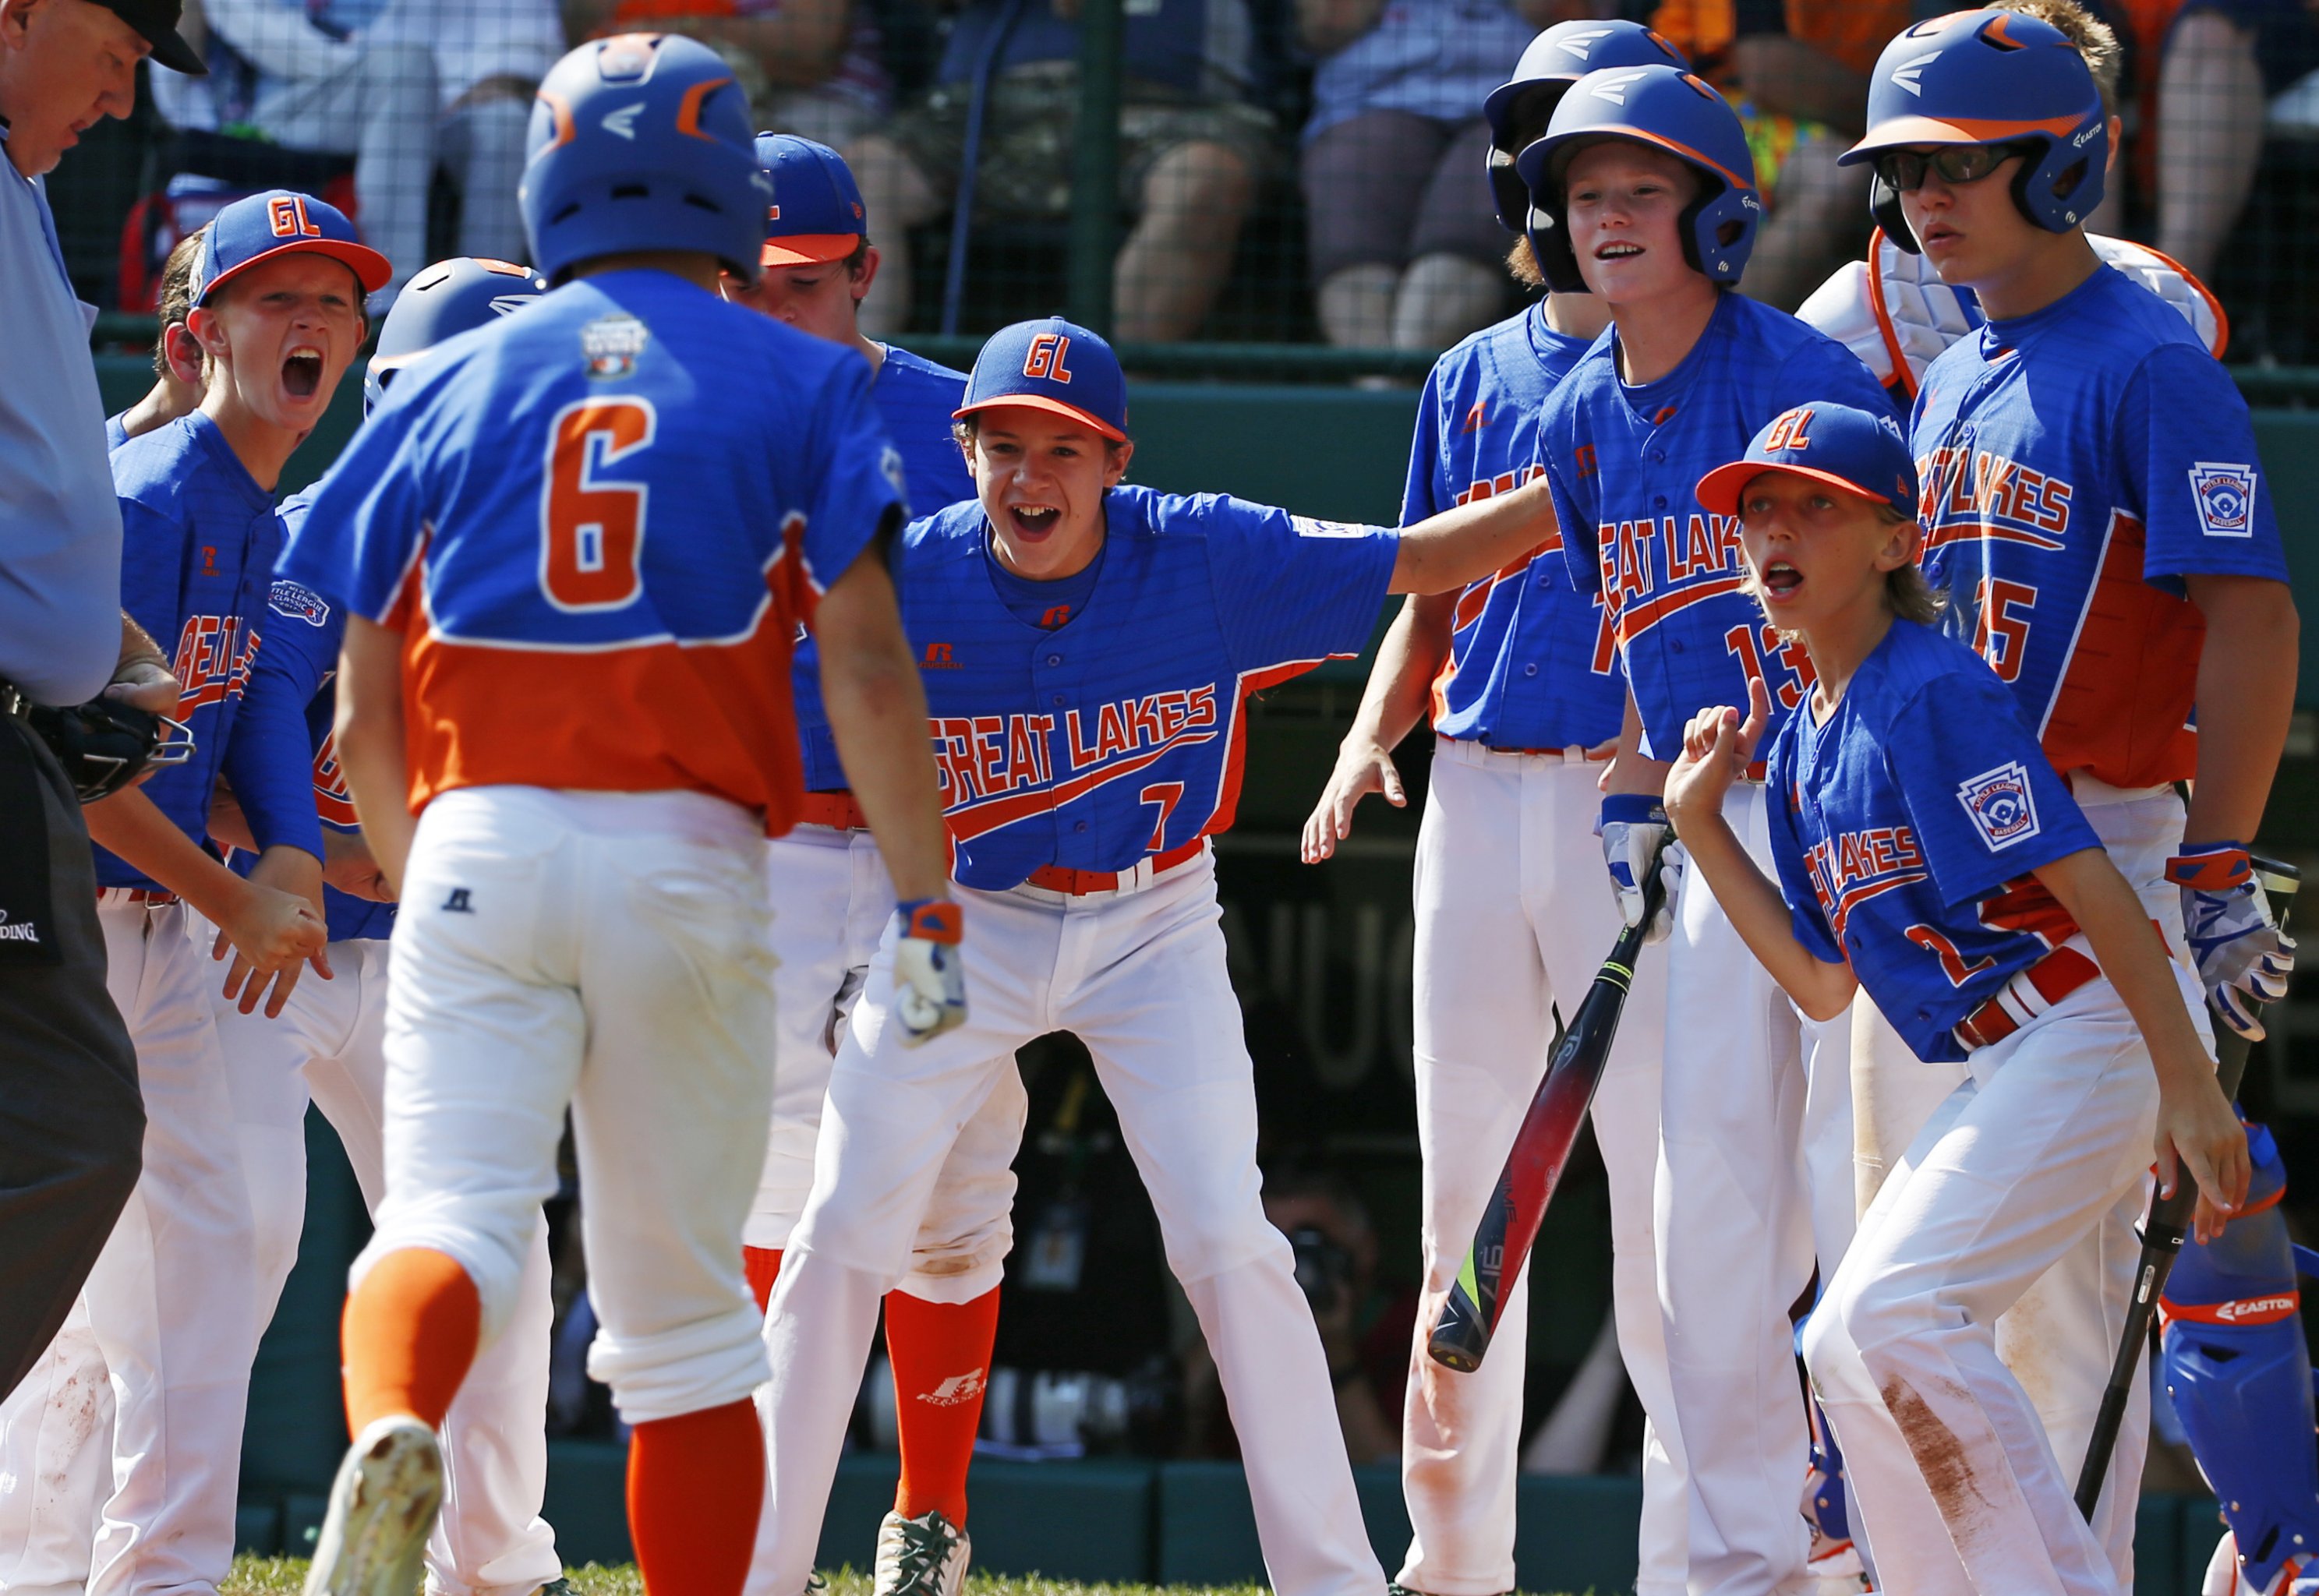 Little League on X: Cut short but action packed #LLWS